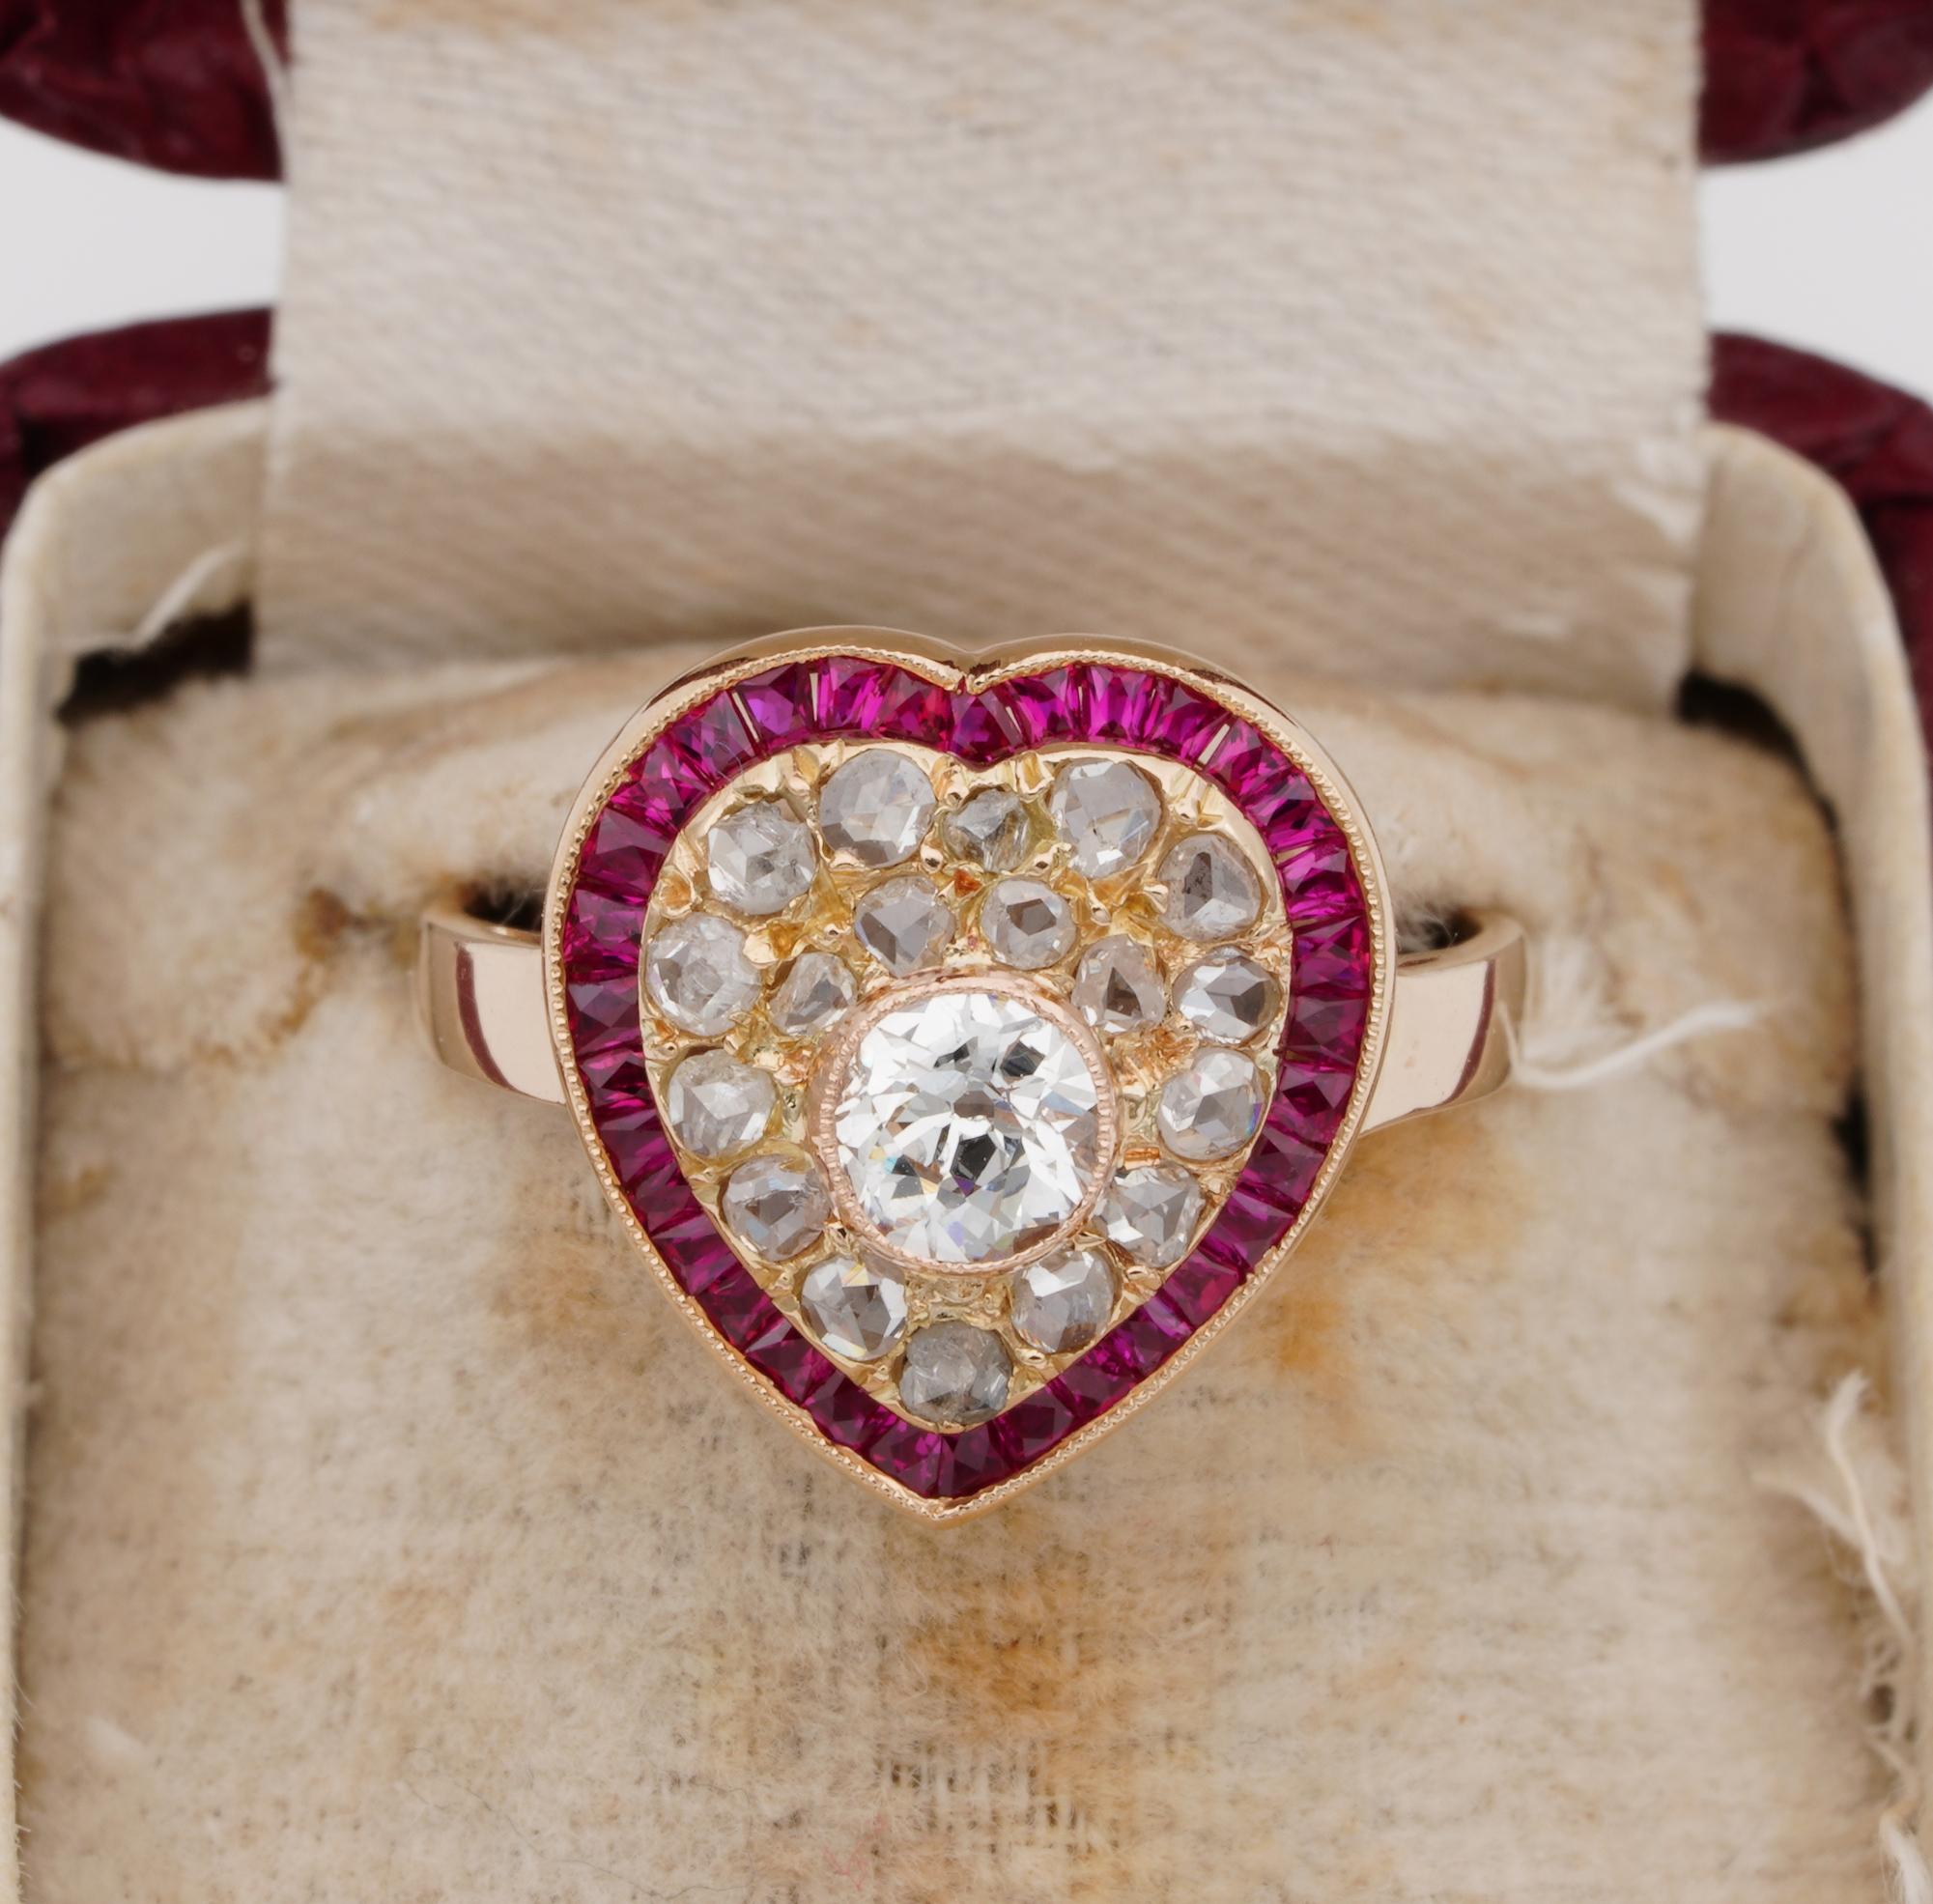 Love Me for Ever!

This superb authentic Victorian heart ring is just the ring you would LOVE viewing on your finger for ever
A romantic Love token from the Victorian era, beautifully designed , artfully hand crafted as unique
The heart sits